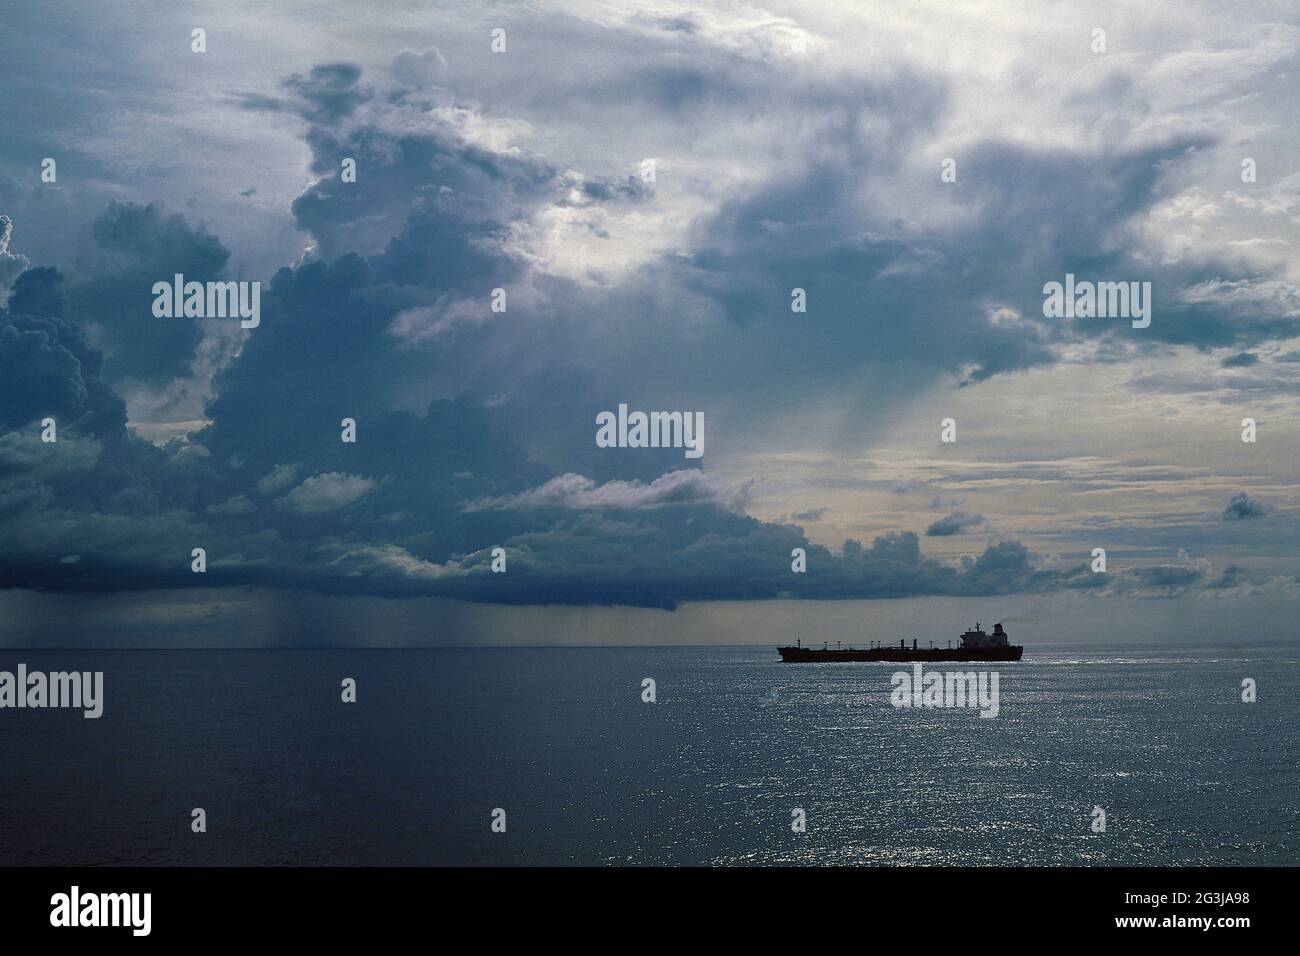 Landscape, seascape. A cargo ship, after departure,  proceeding in the ocean under the shadow of clouds Stock Photo